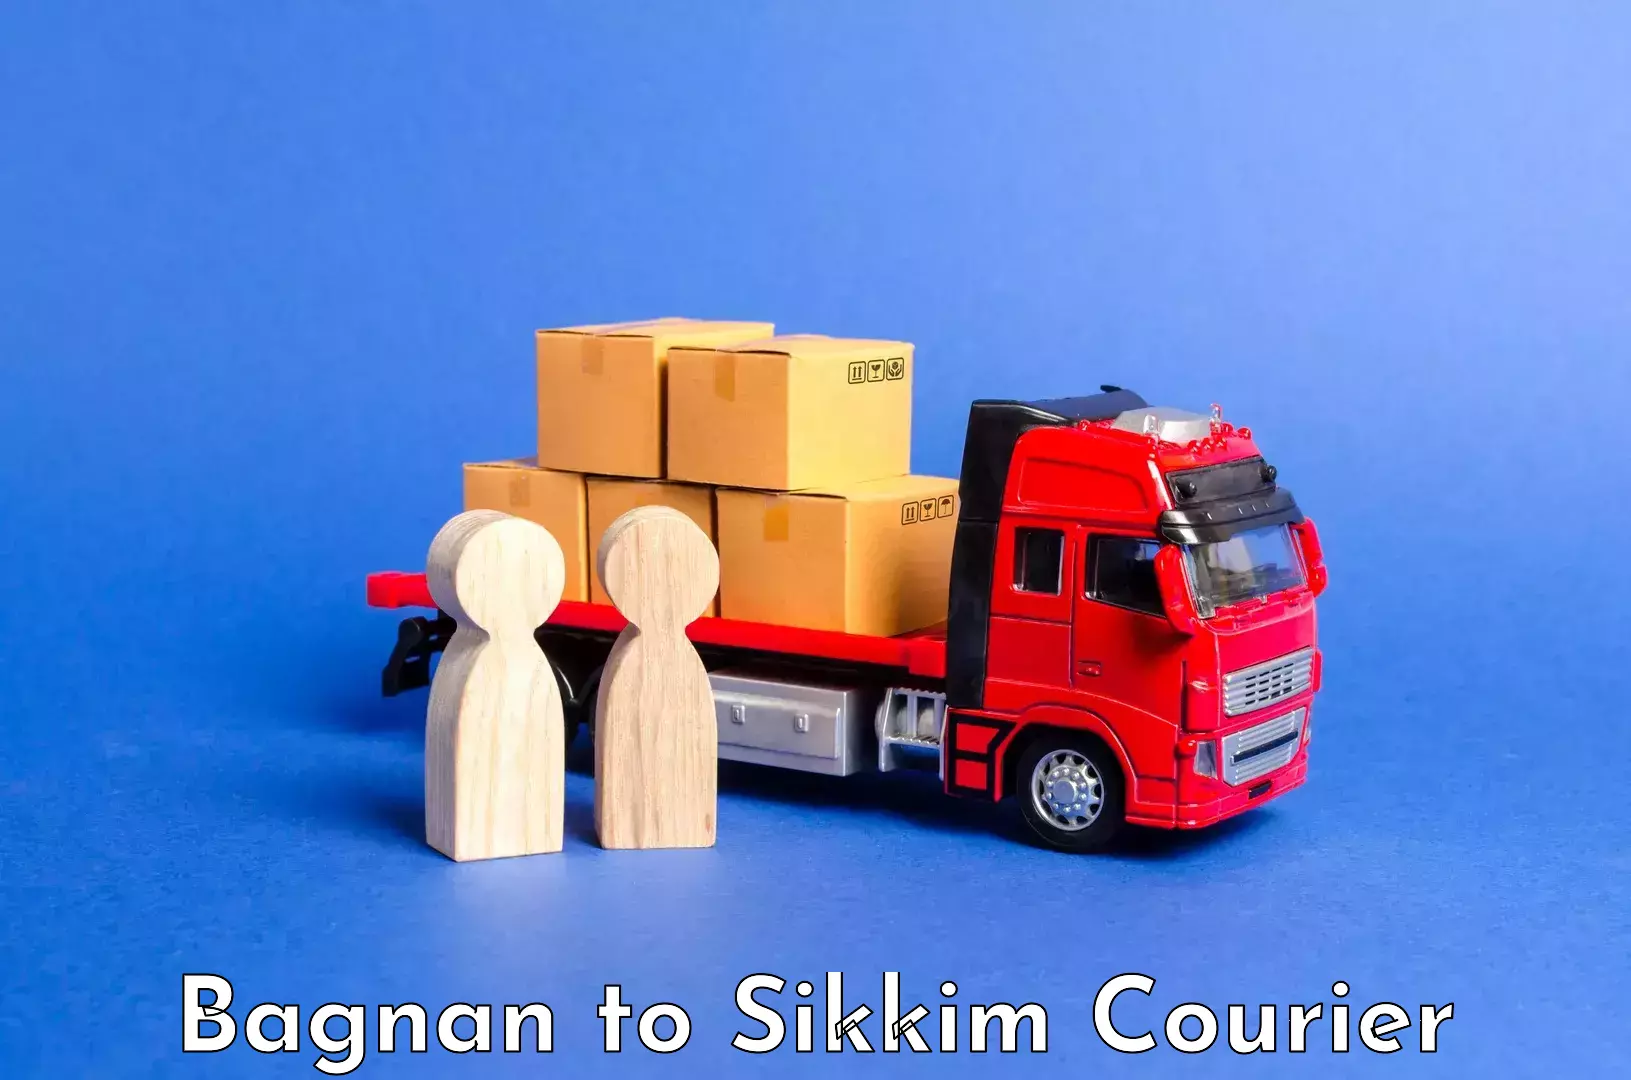 Baggage transport network Bagnan to East Sikkim